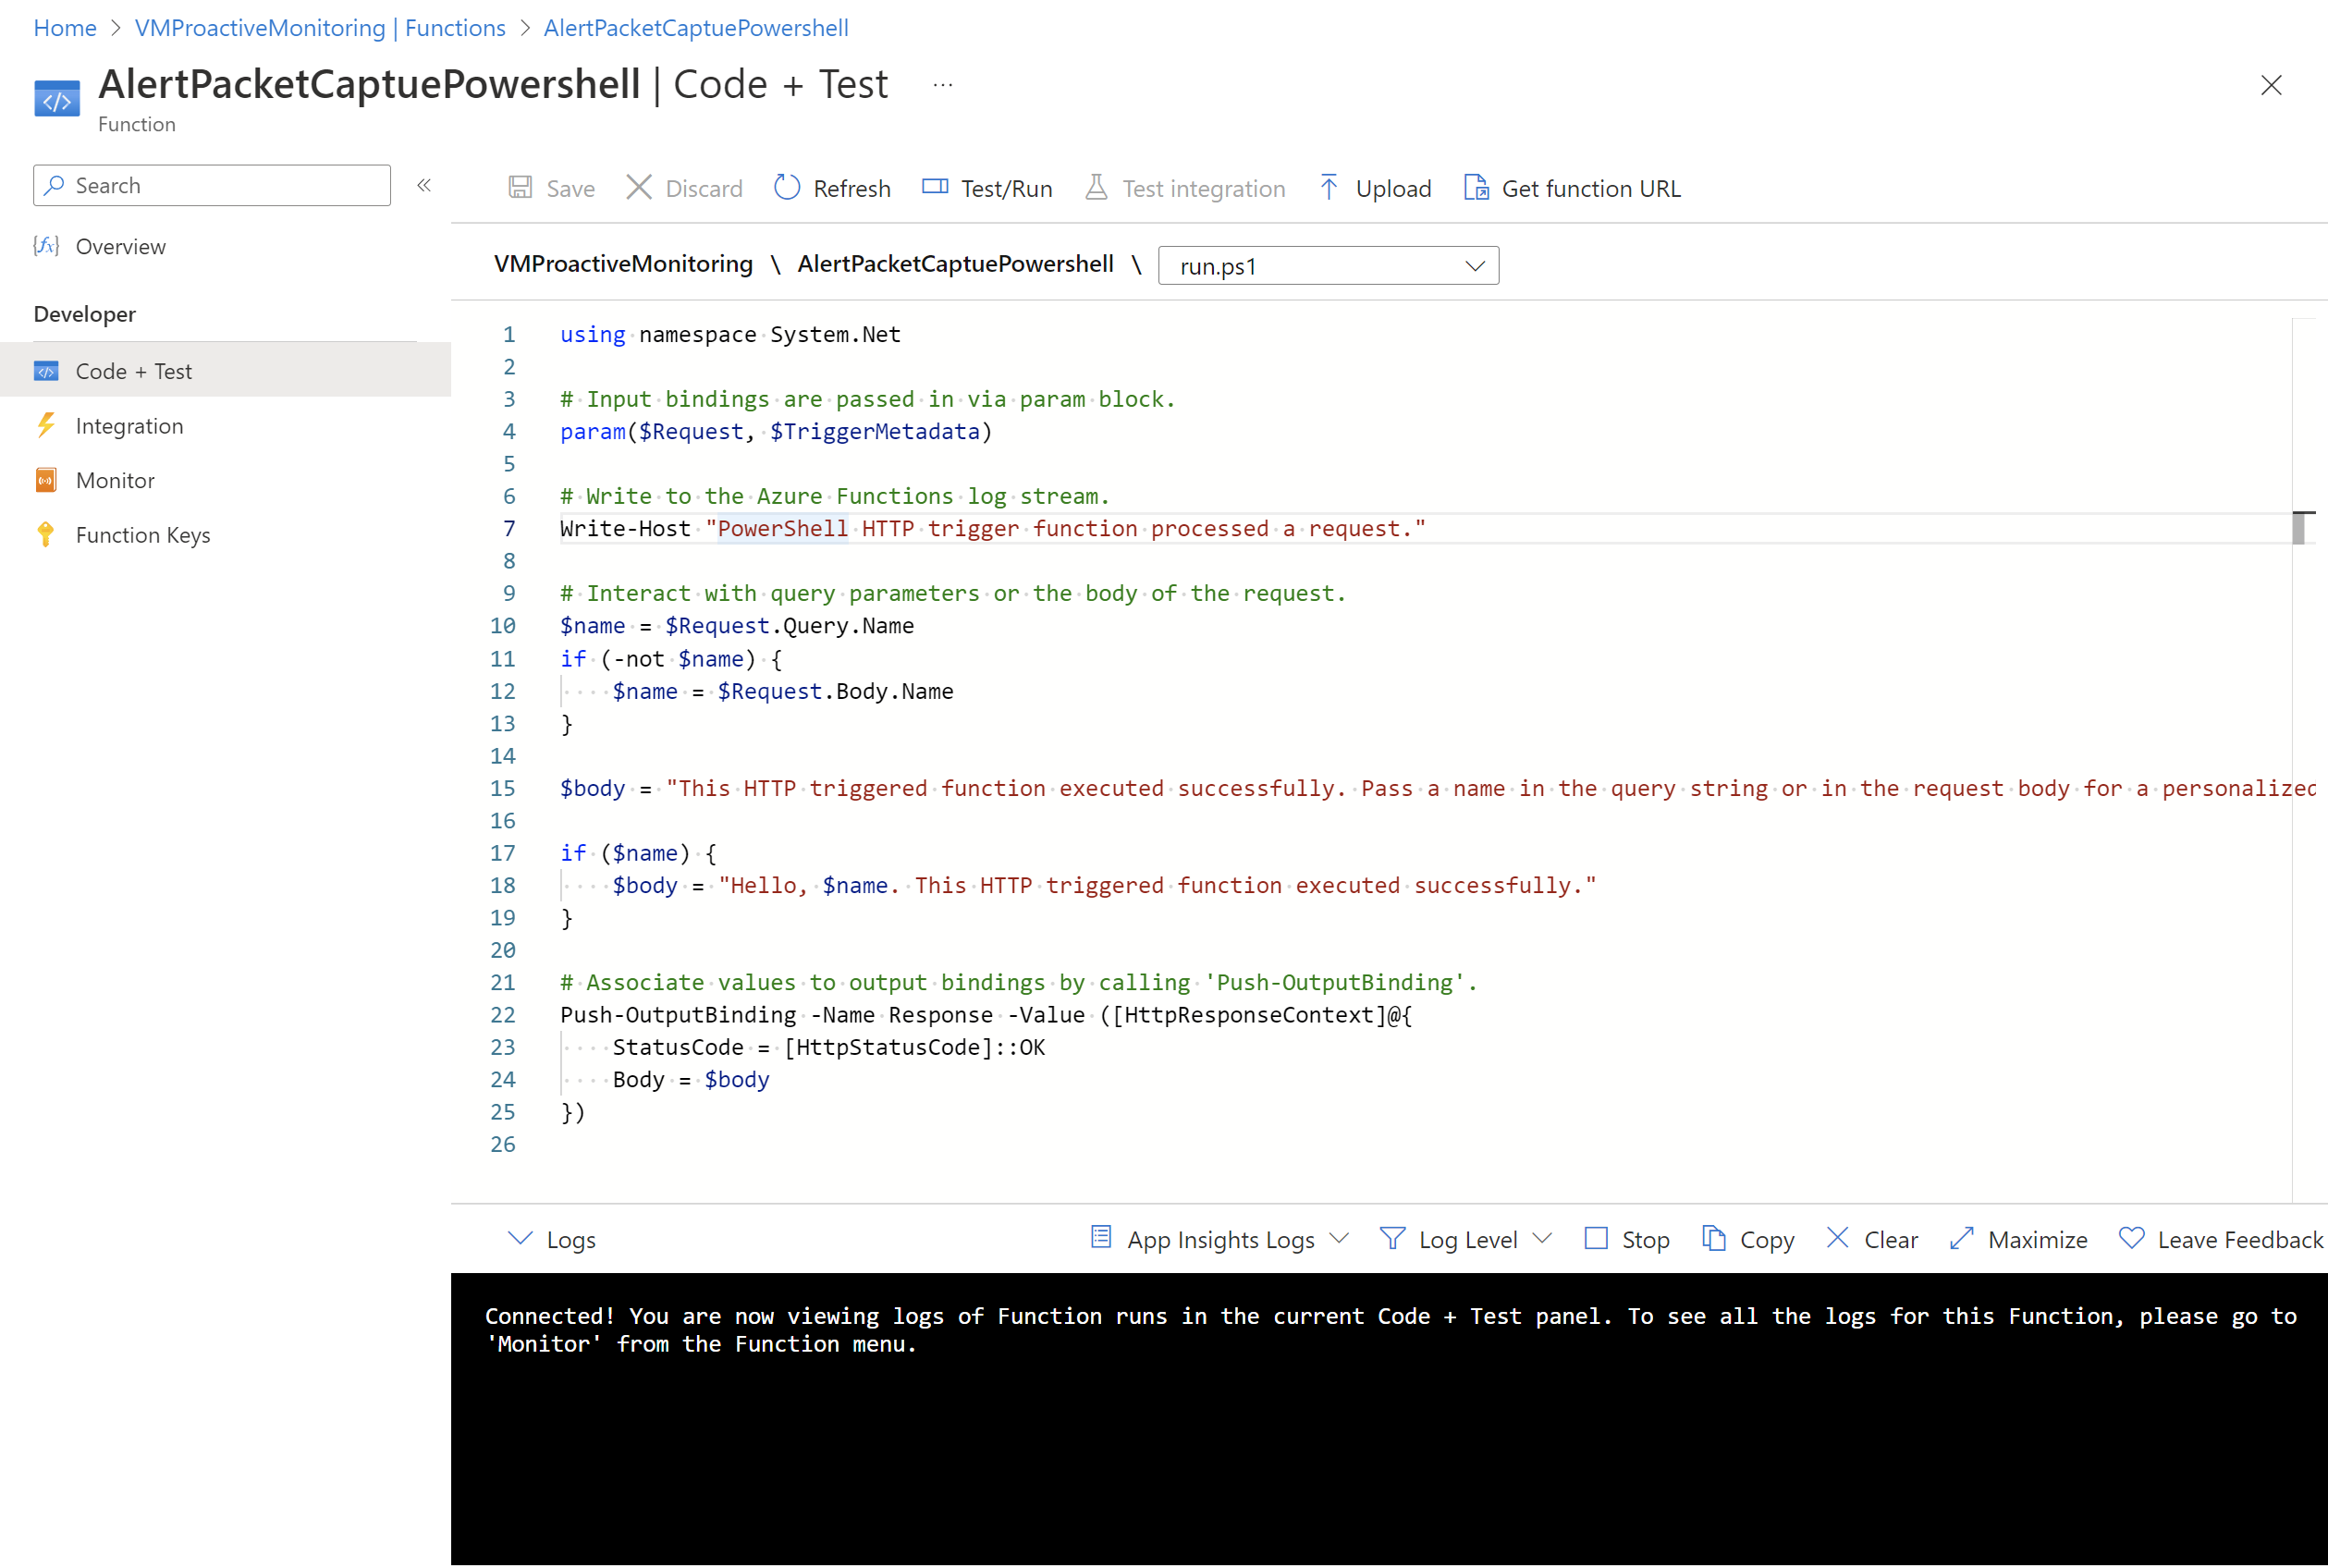 Screenshot of the Code + Test page for a function.